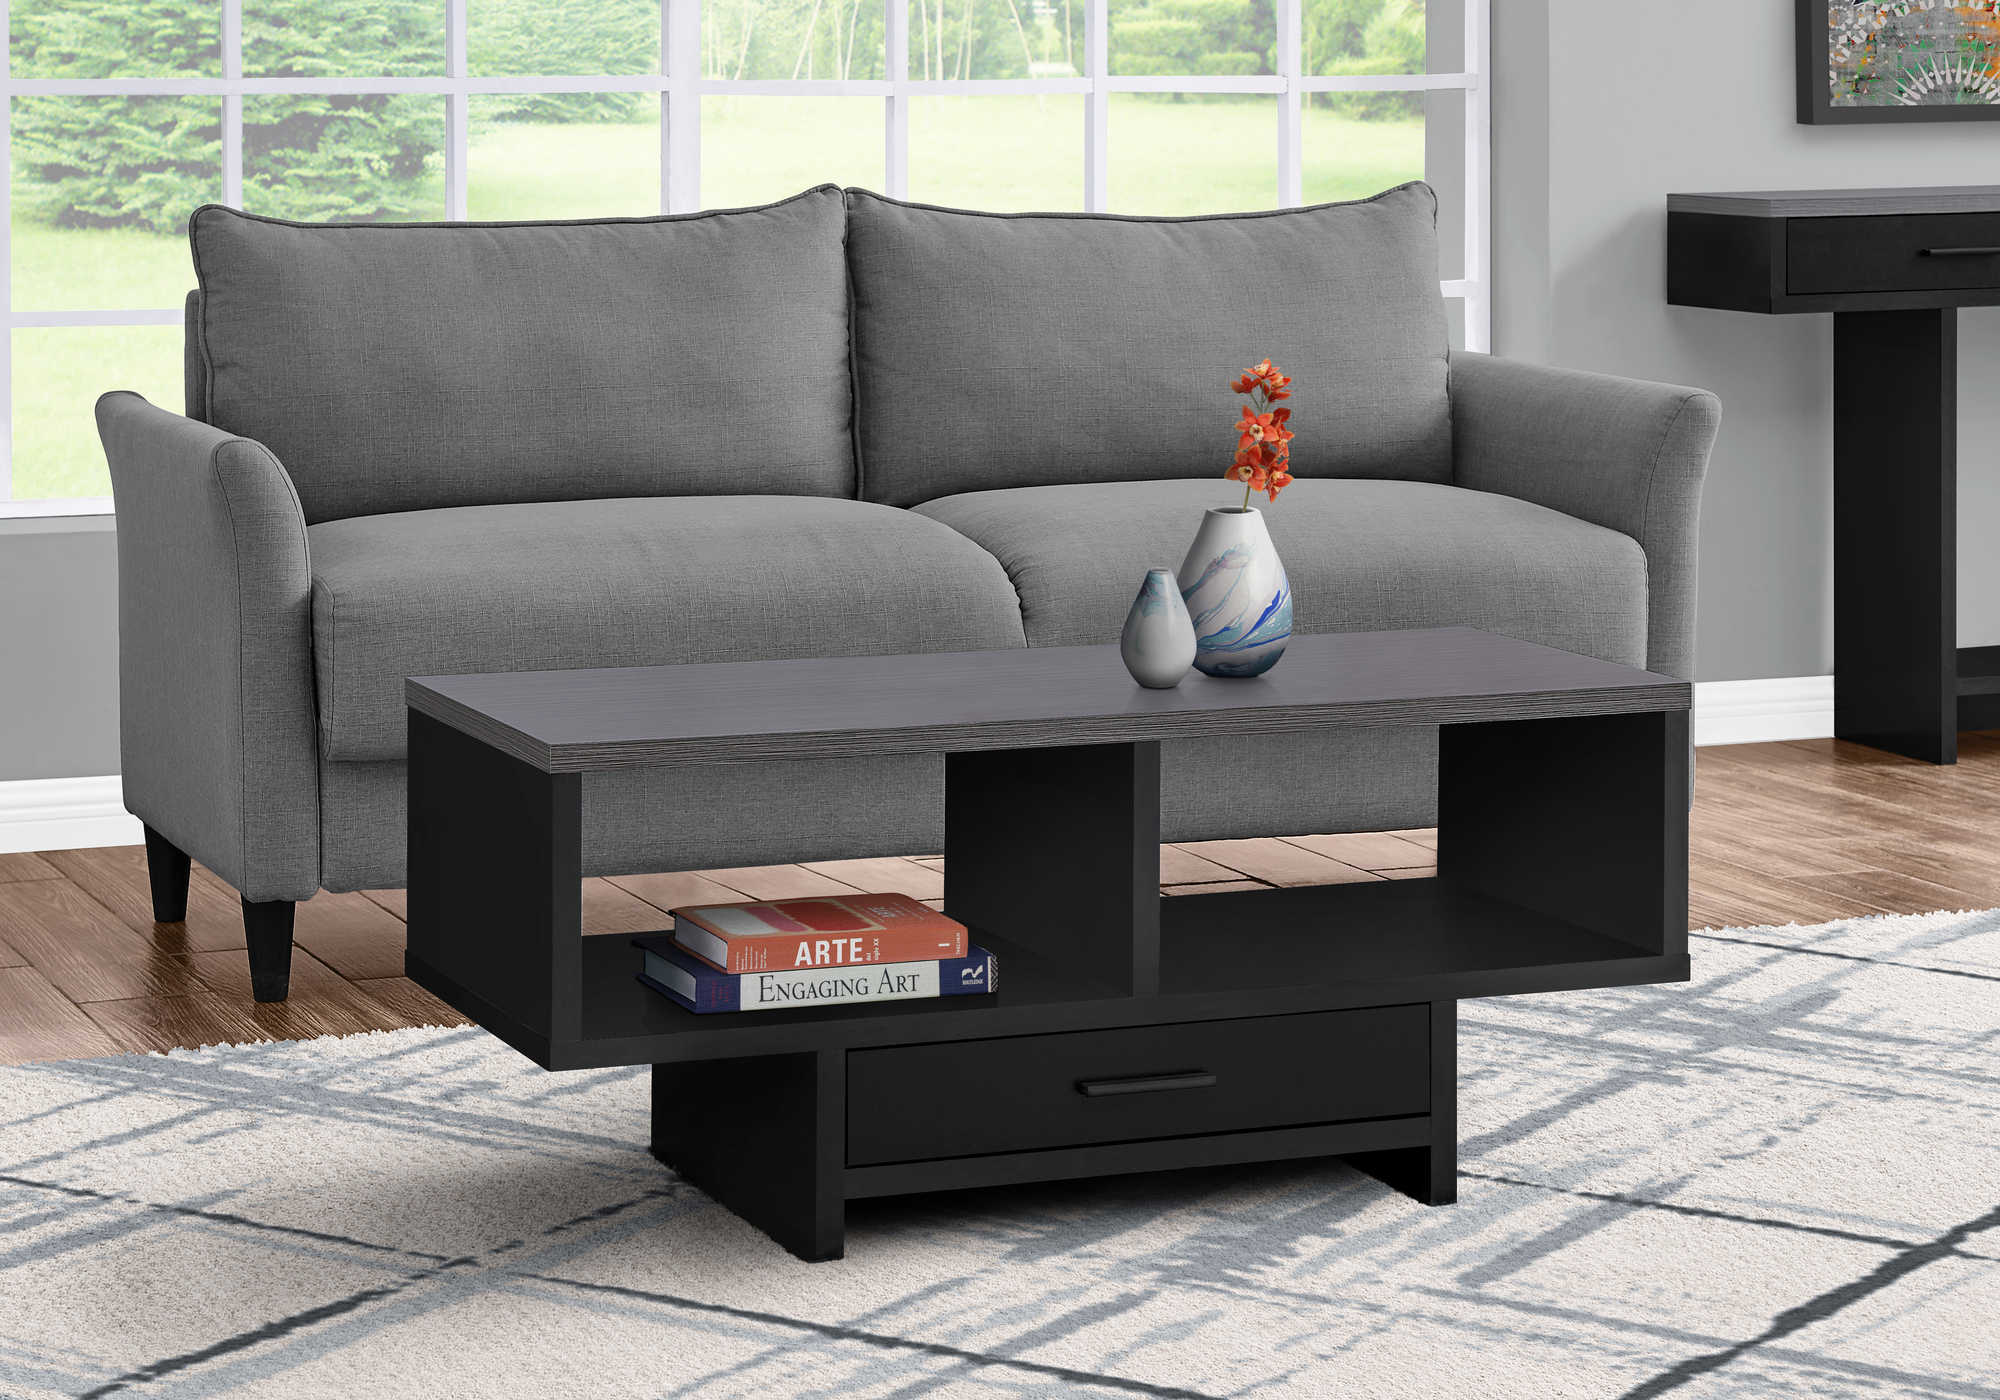 COFFEE TABLE - BLACK / GREY TOP WITH STORAGE